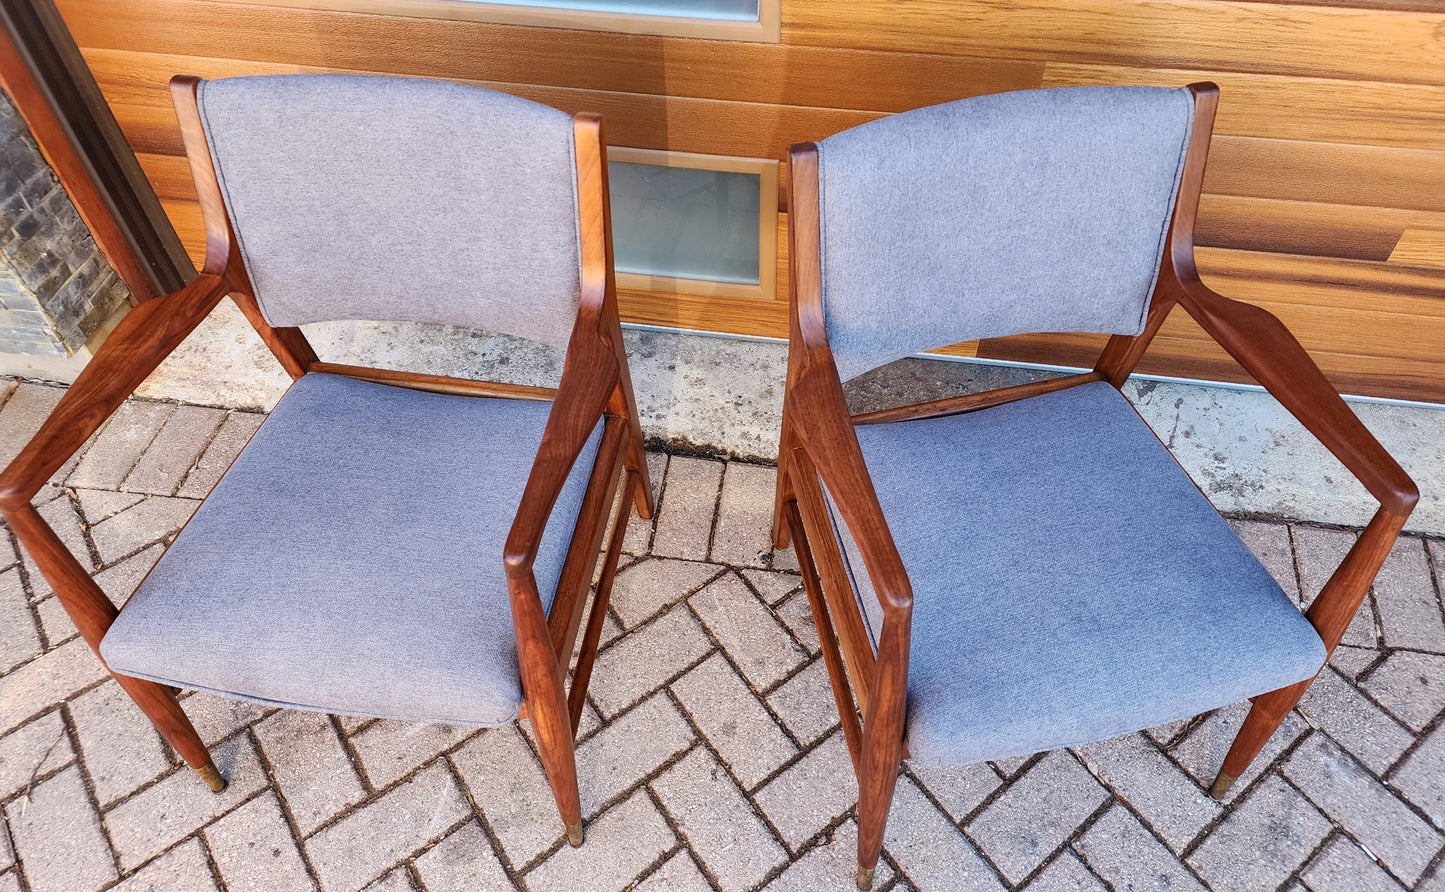 2 REFINISHED REUPHOLSTERED Mid Century Modern Walnut Arm Chairs